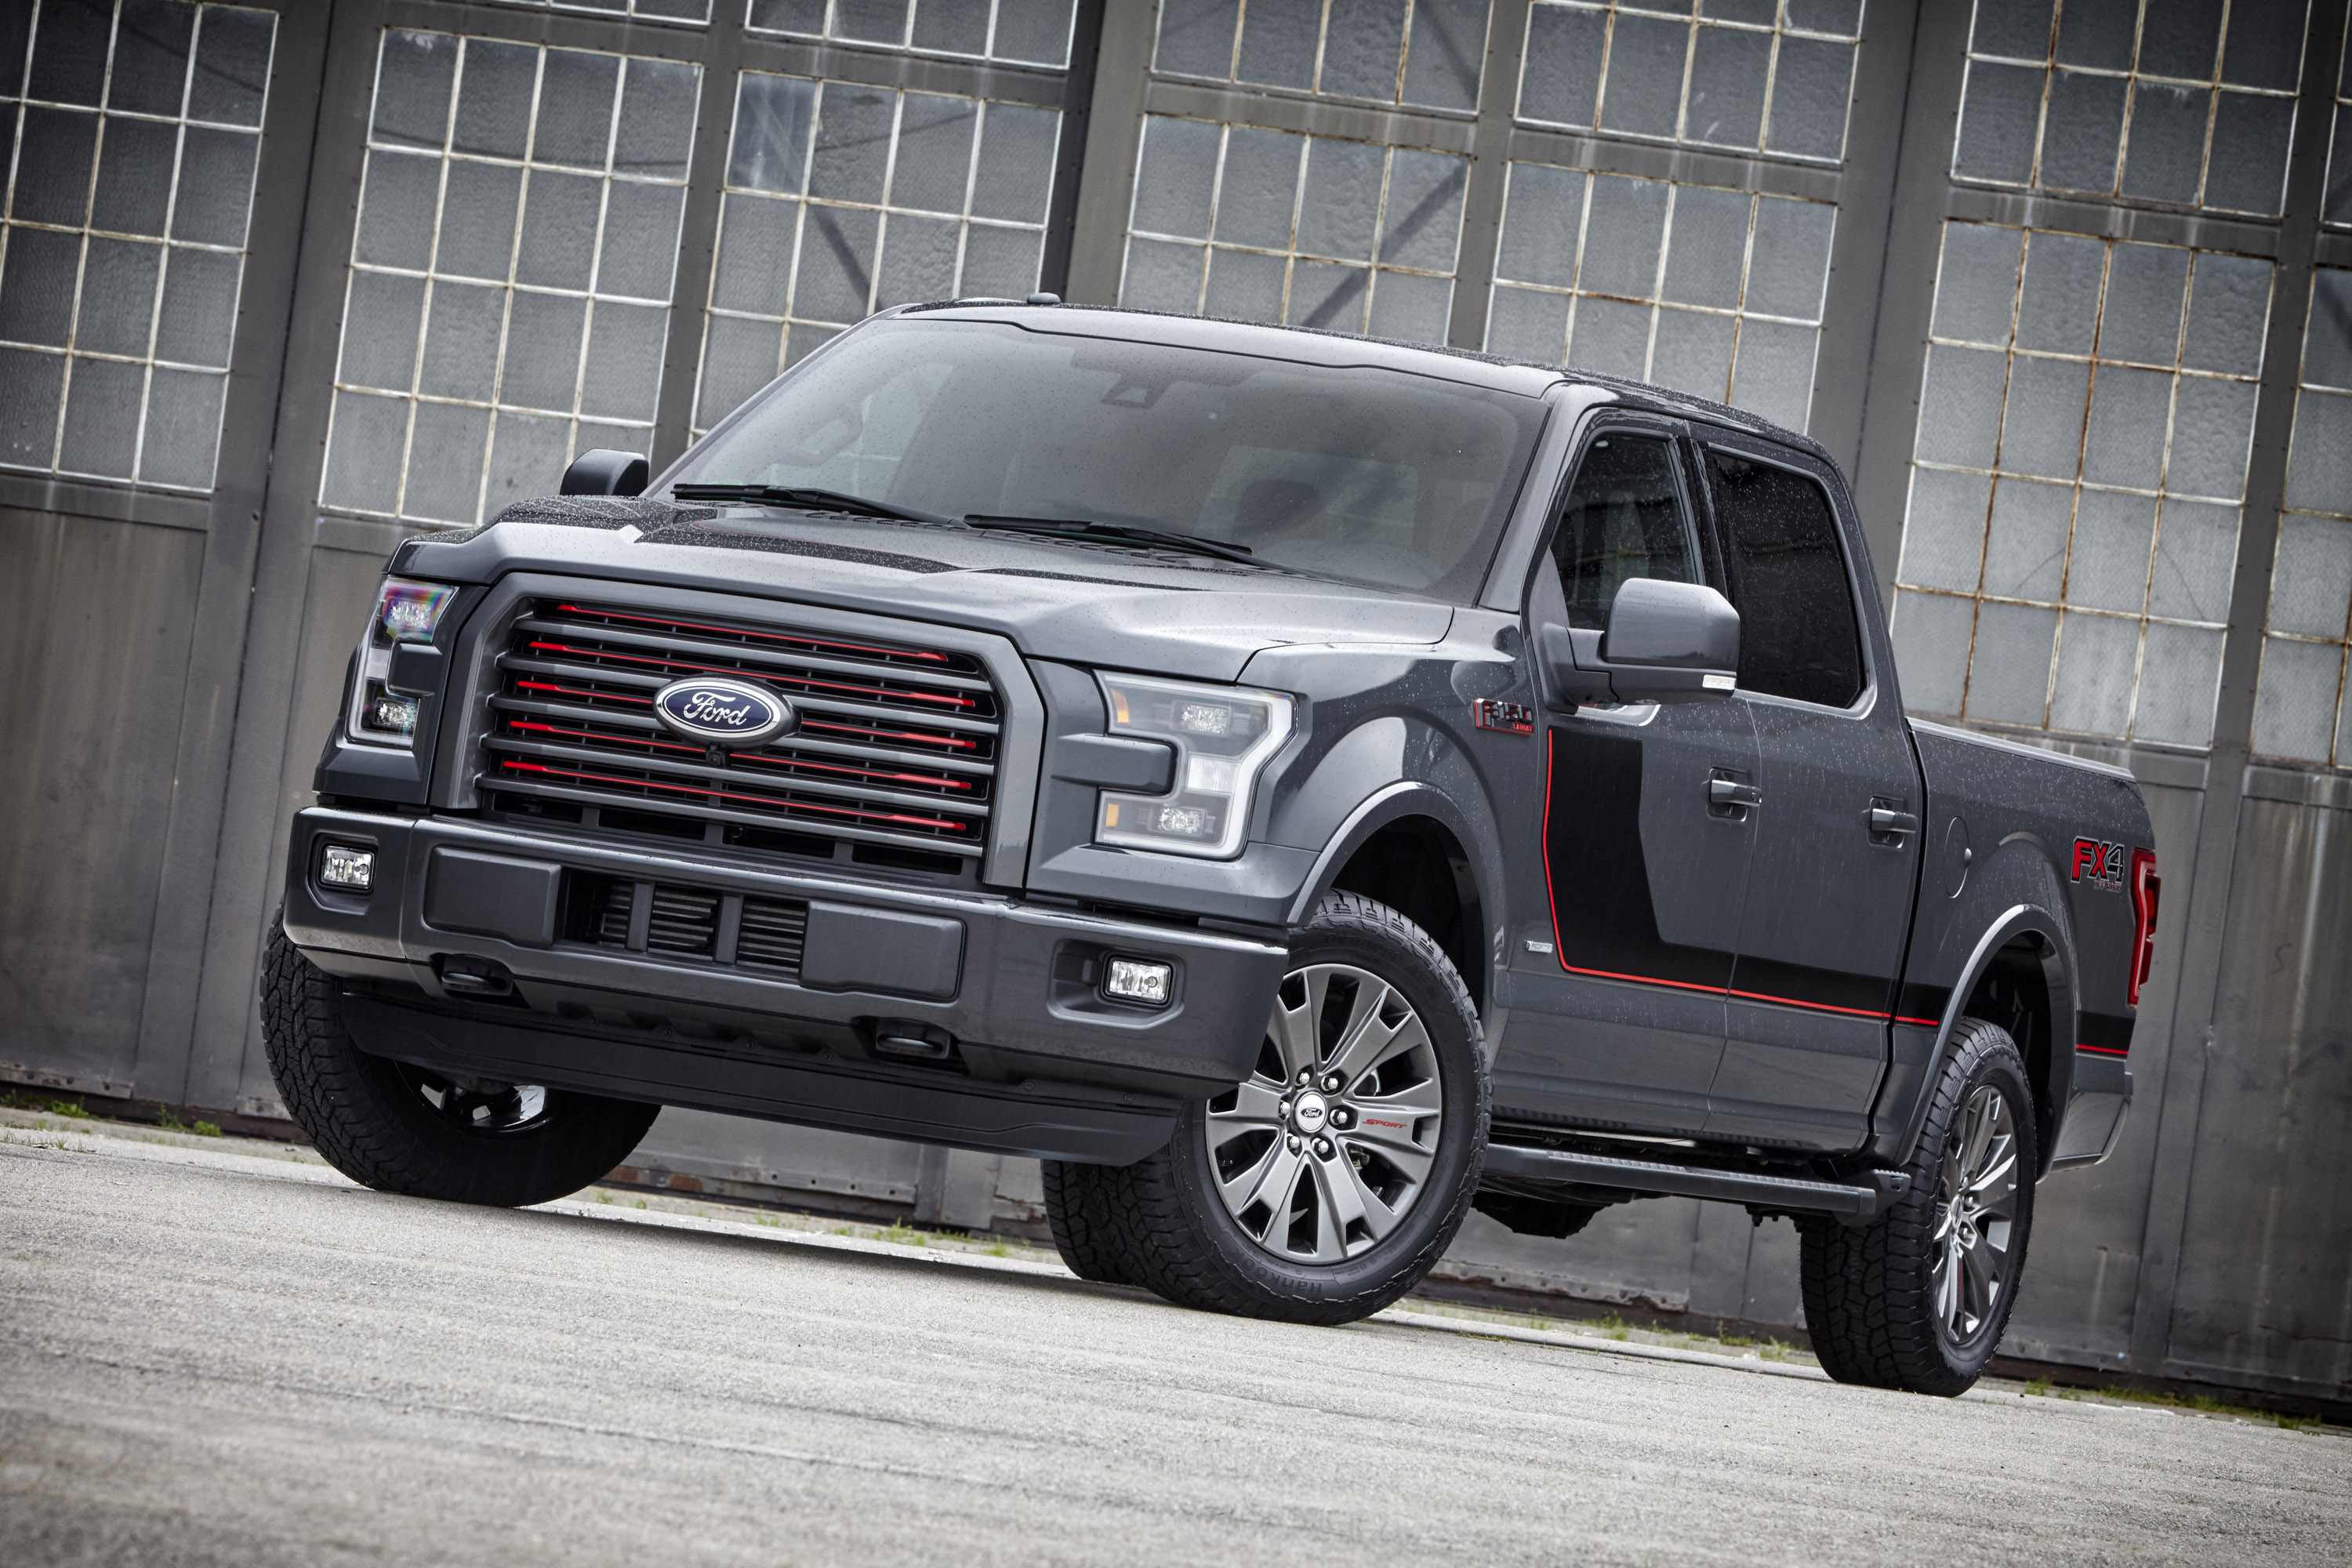 2016 Ford F 150 Lariat Appearance Package Hd Pictures